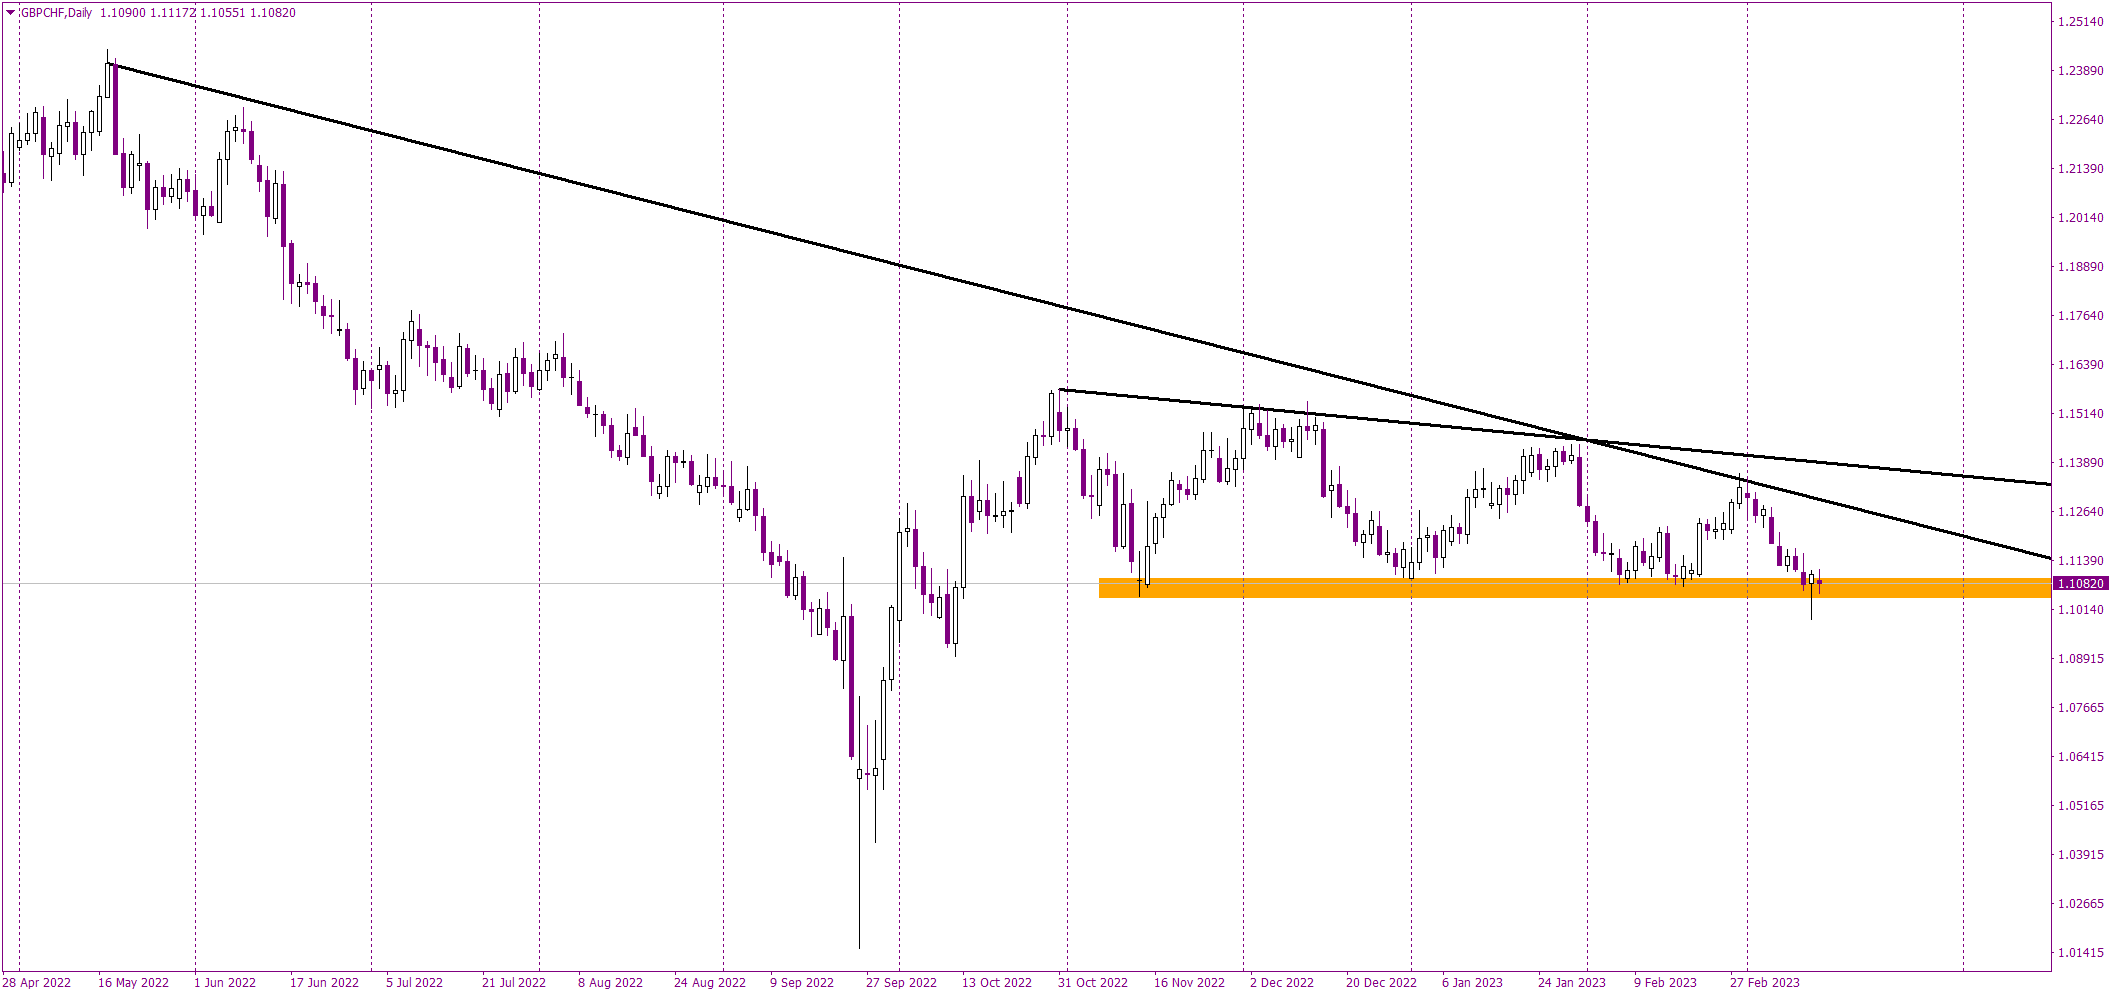 The GBPCHF Conundrum: Will the Support Hold or Break?